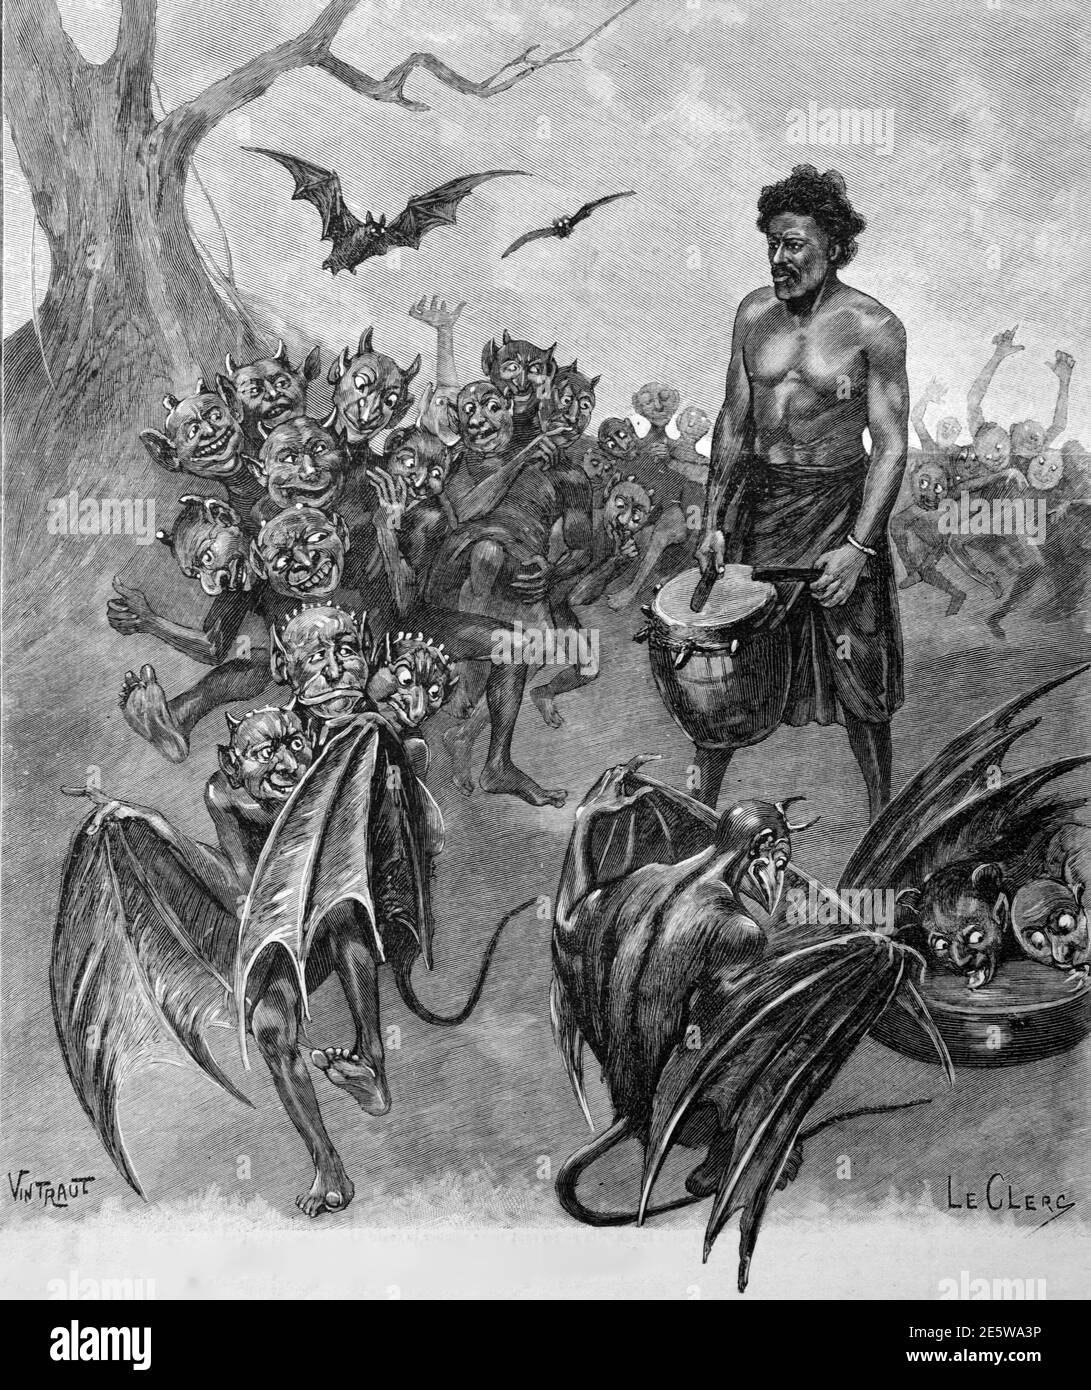 Animist Legend of Sou-sou Devils as Croos Between Evil Humans and Blood Sucking Bats in the Republic of Guinea or Guinea-Conakry  West Africa 1903 Vintage Illustration or Engraving Stock Photo